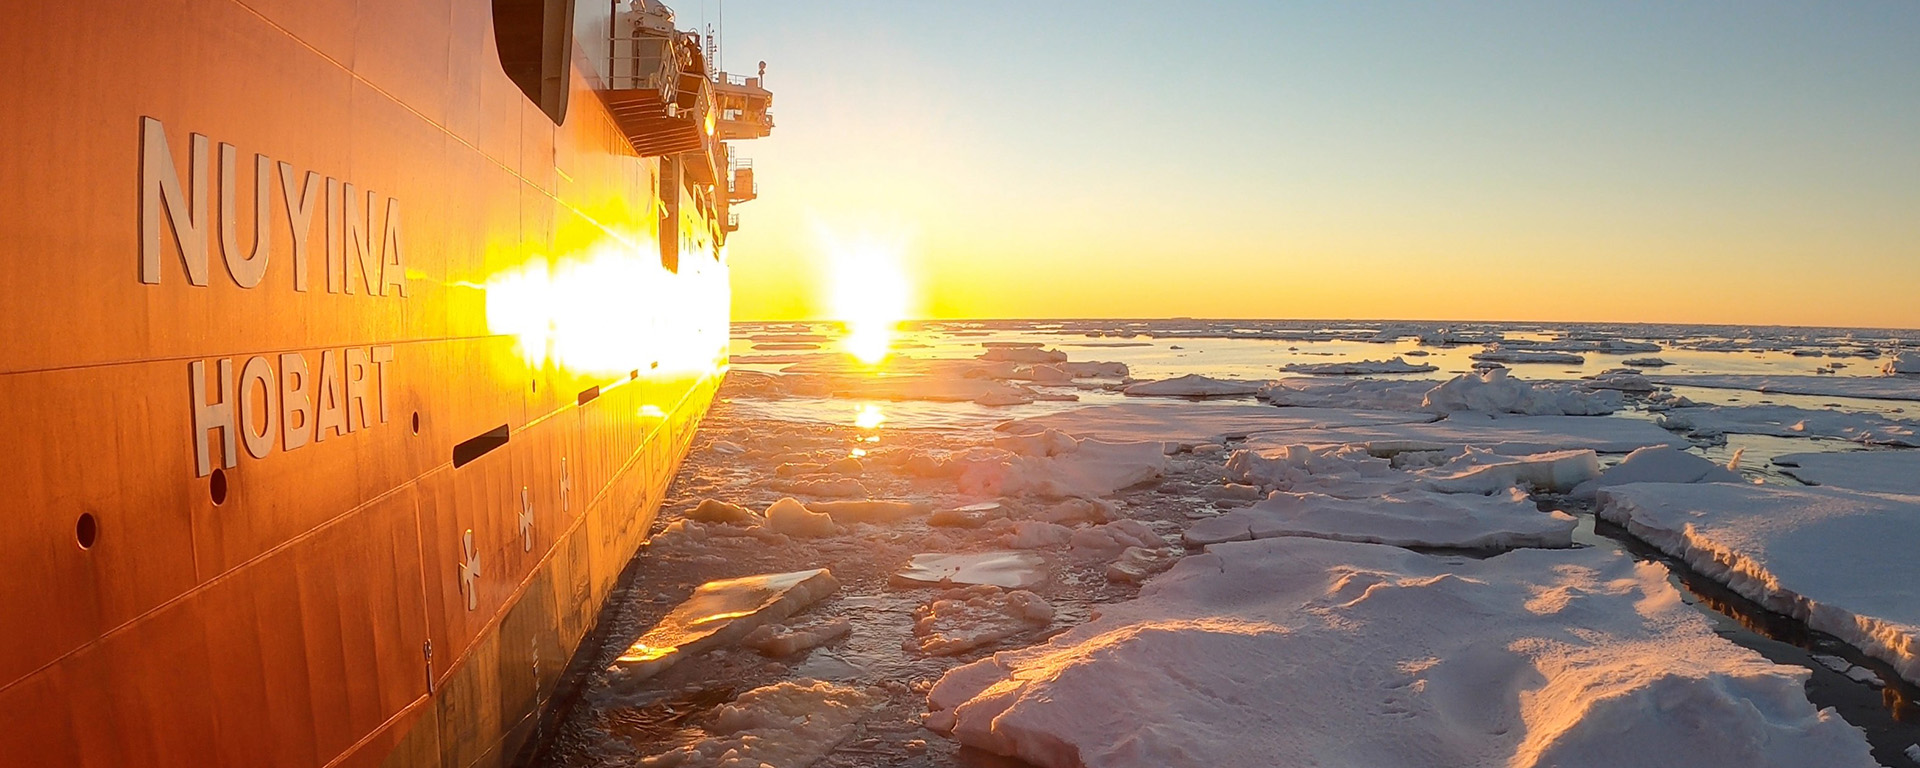 An orange and white ship sails through the ocean, surrounded by floating chunks of ice. The sun is setting in a clear sky.